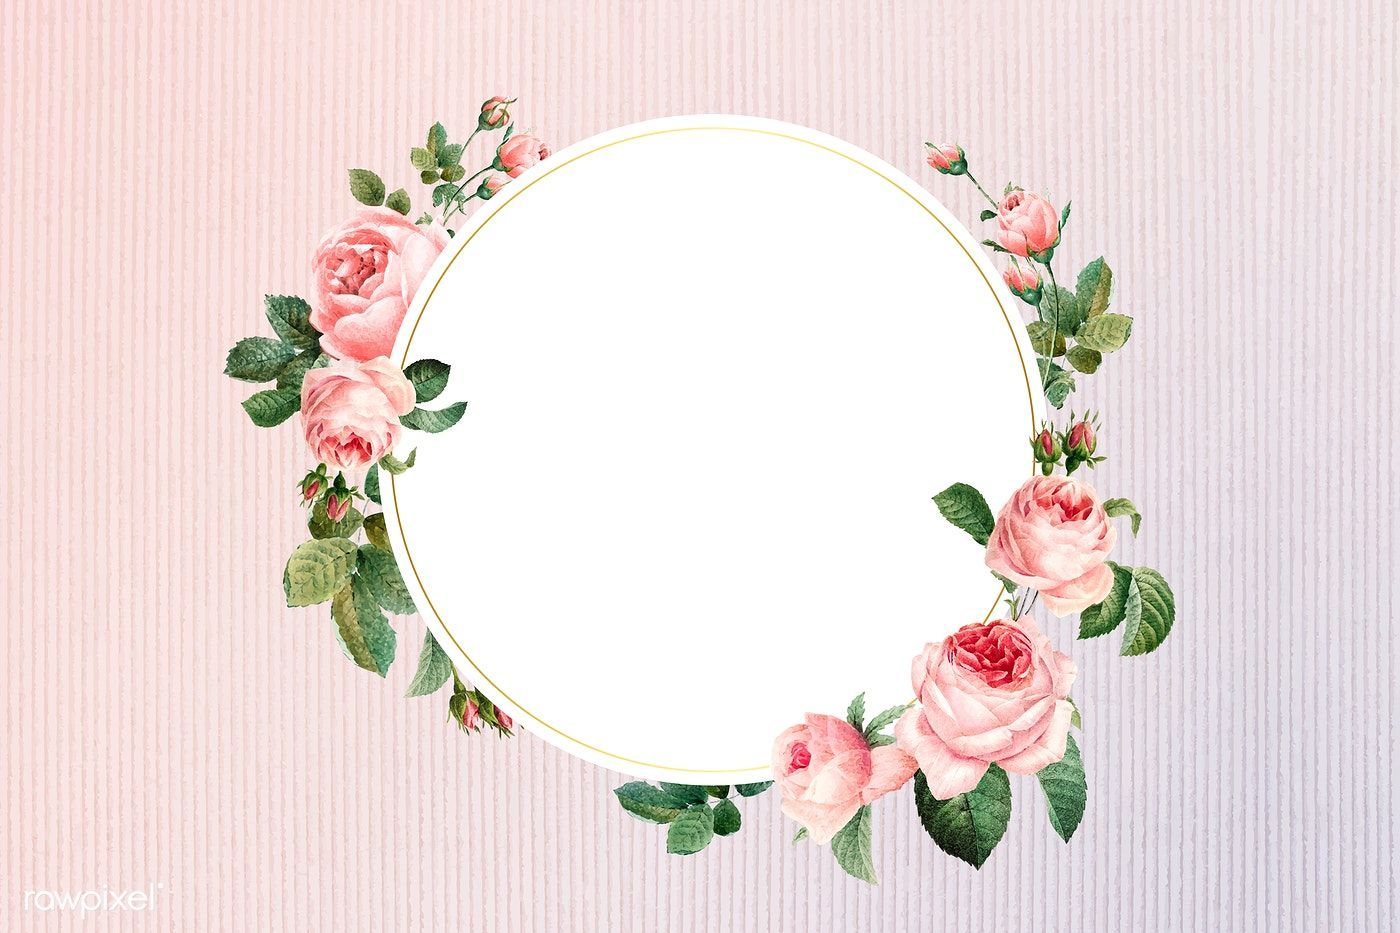 Download premium vector of Floral round frame on a fabric